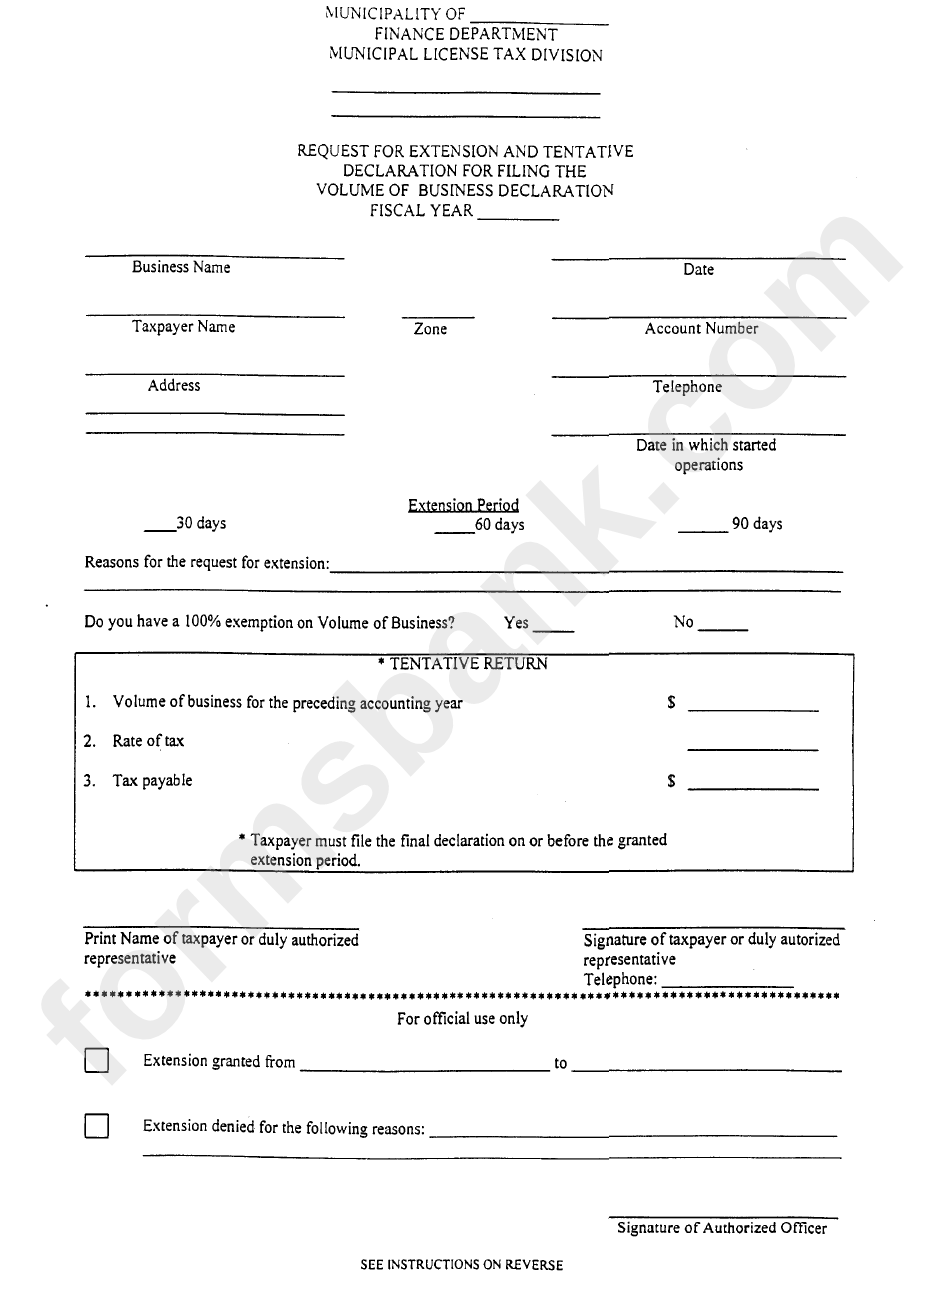 Request For Extension And Tentative Declaration For Filing The Volume Of Business Declaration Fiscal Year ____ Form